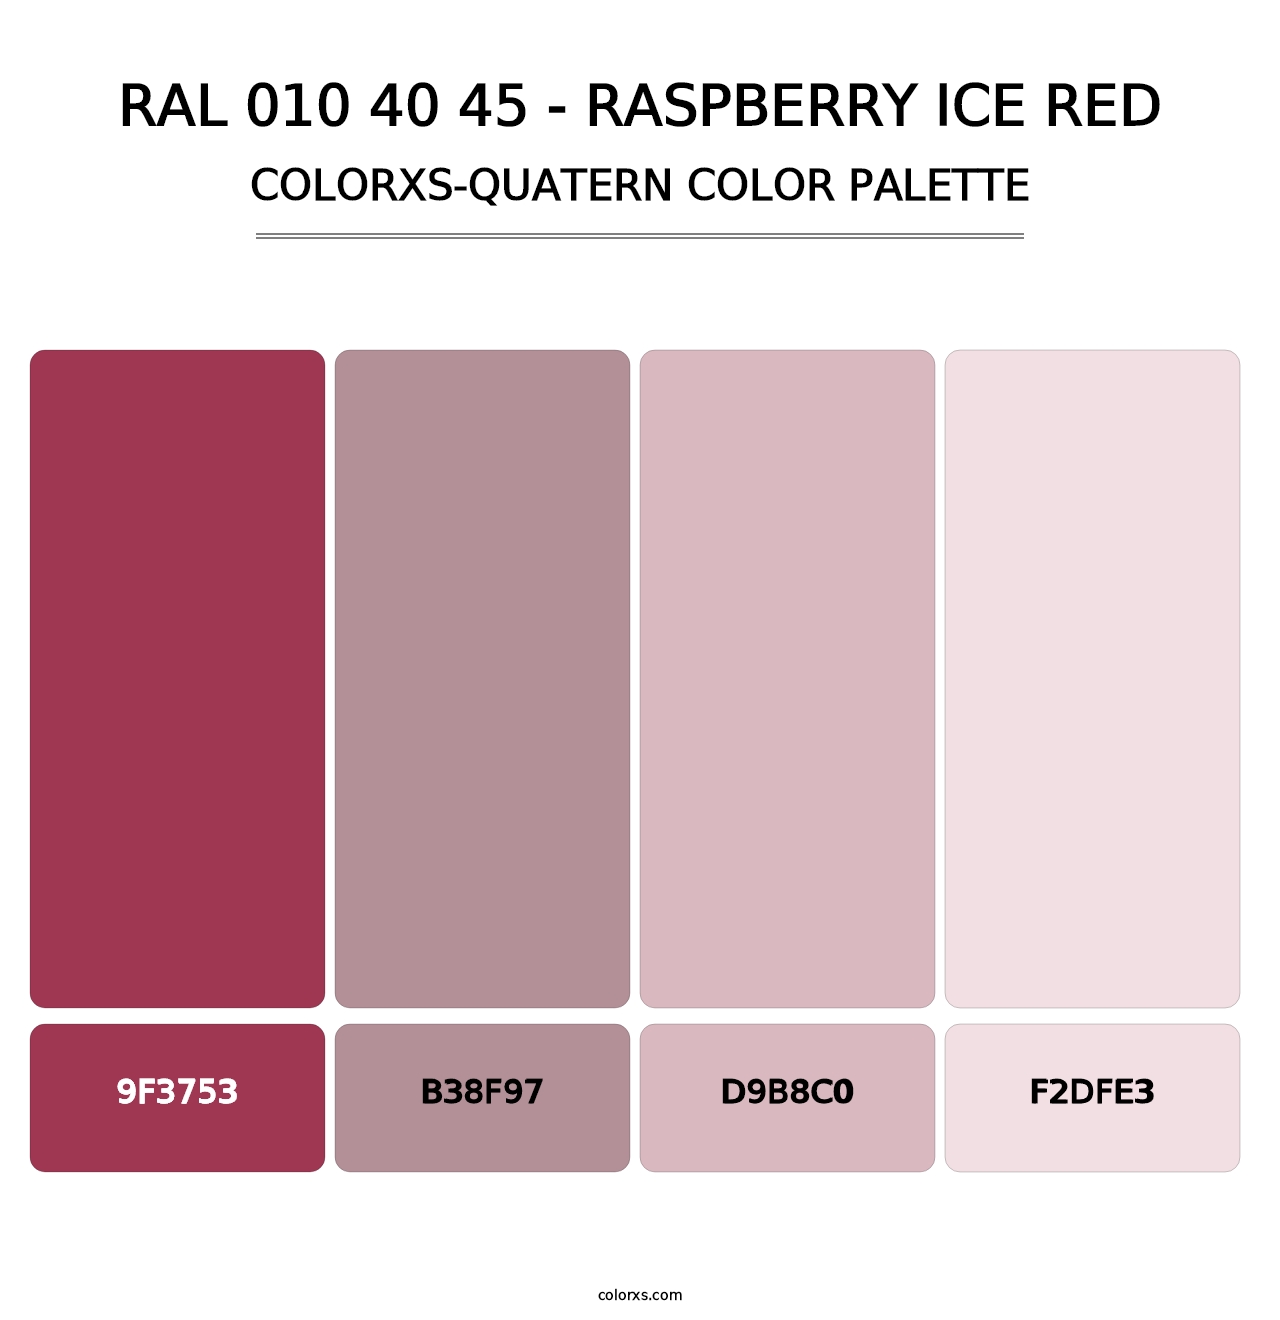 RAL 010 40 45 - Raspberry Ice Red - Colorxs Quatern Palette